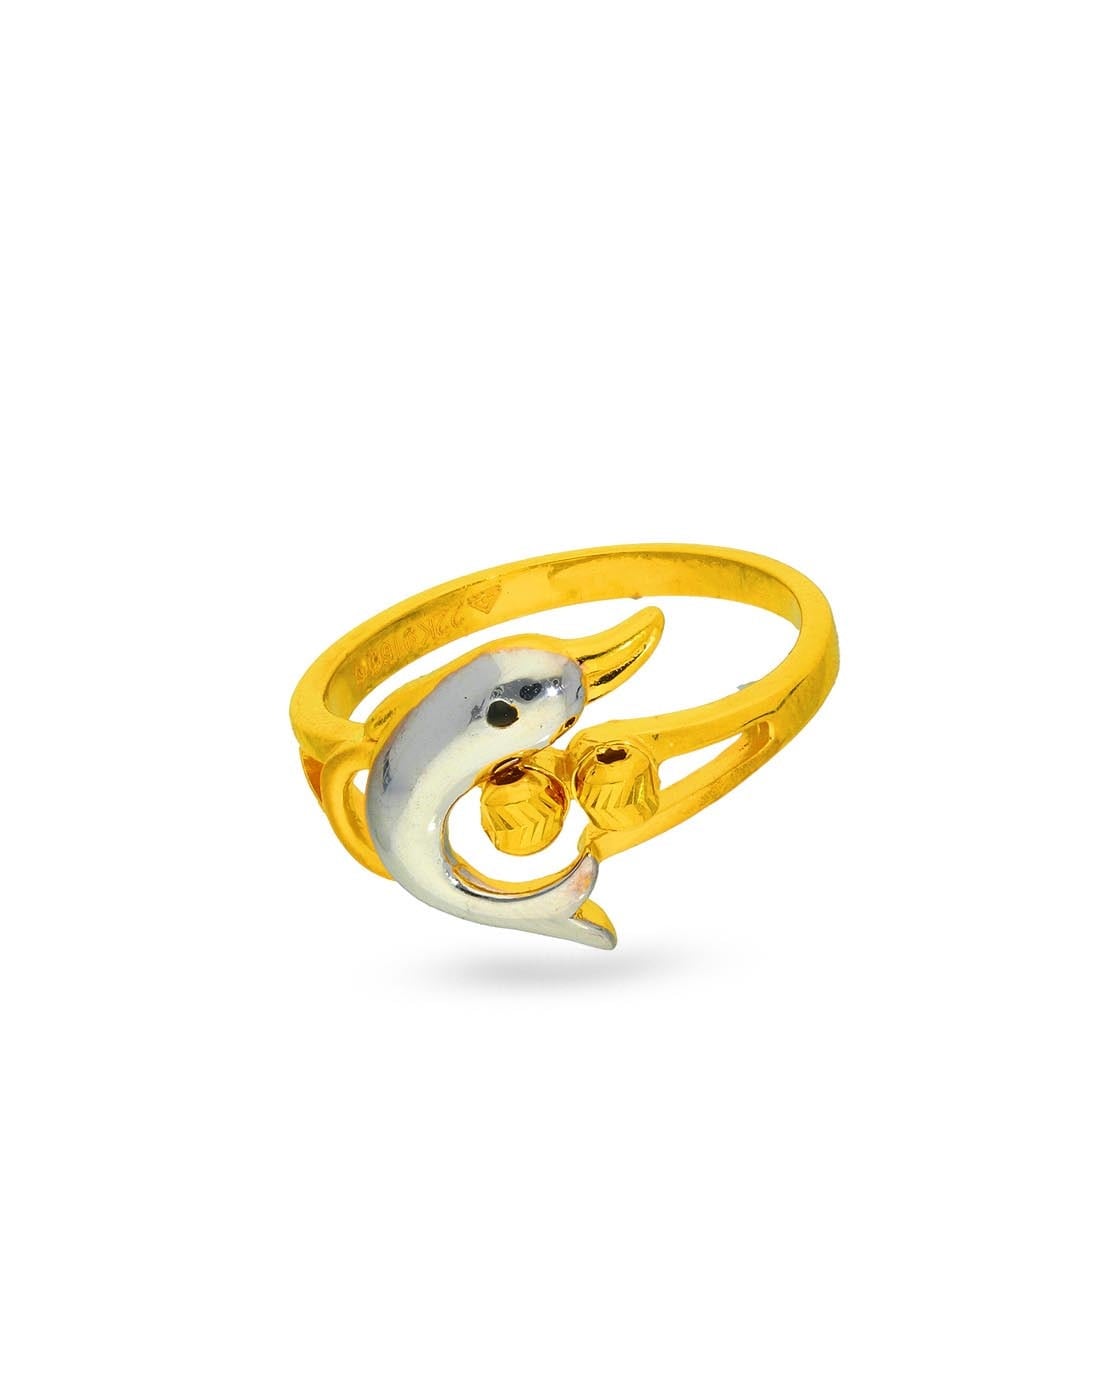 Estate 14K Yellow Gold Dolphin Ring 001-990-02772 | Rolland's Jewelers |  Libertyville, IL